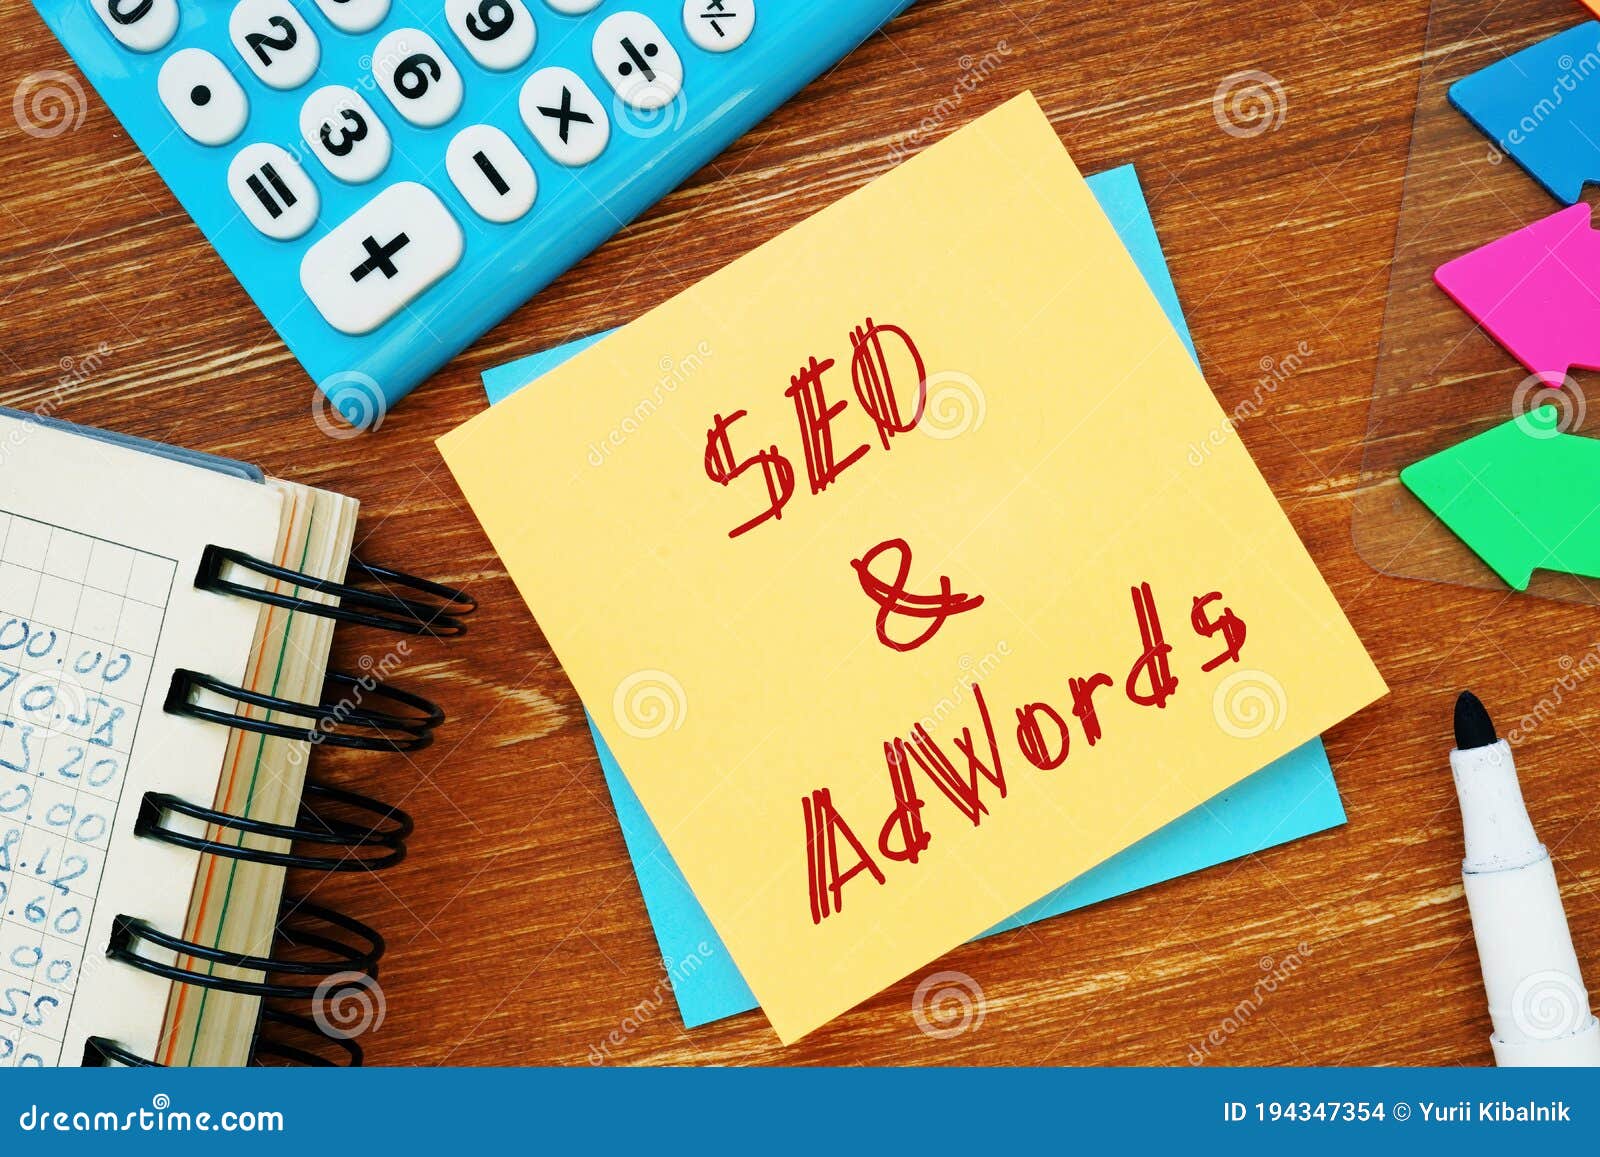 business concept about seo&adwords with sign on the piece of paper